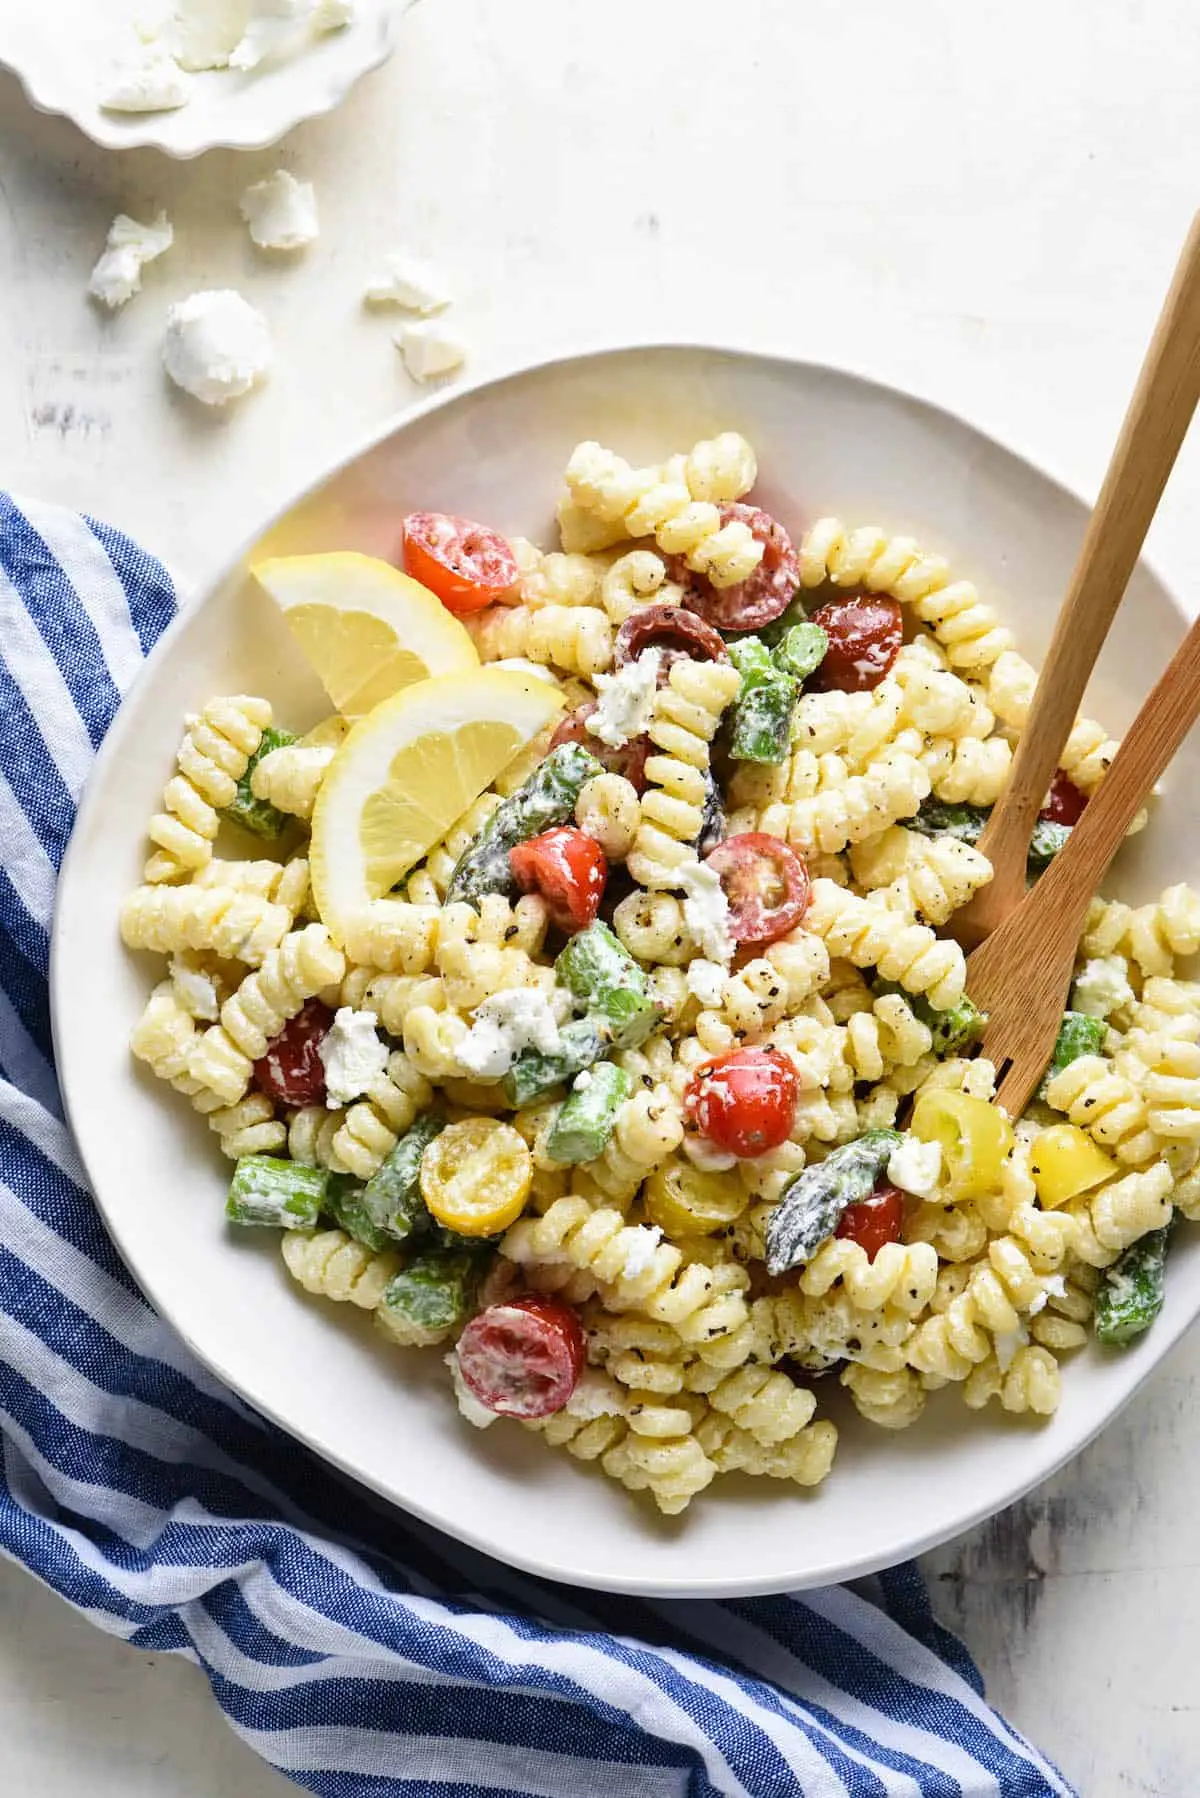 plate with pasta salad and wooden utensils sitting on a towel